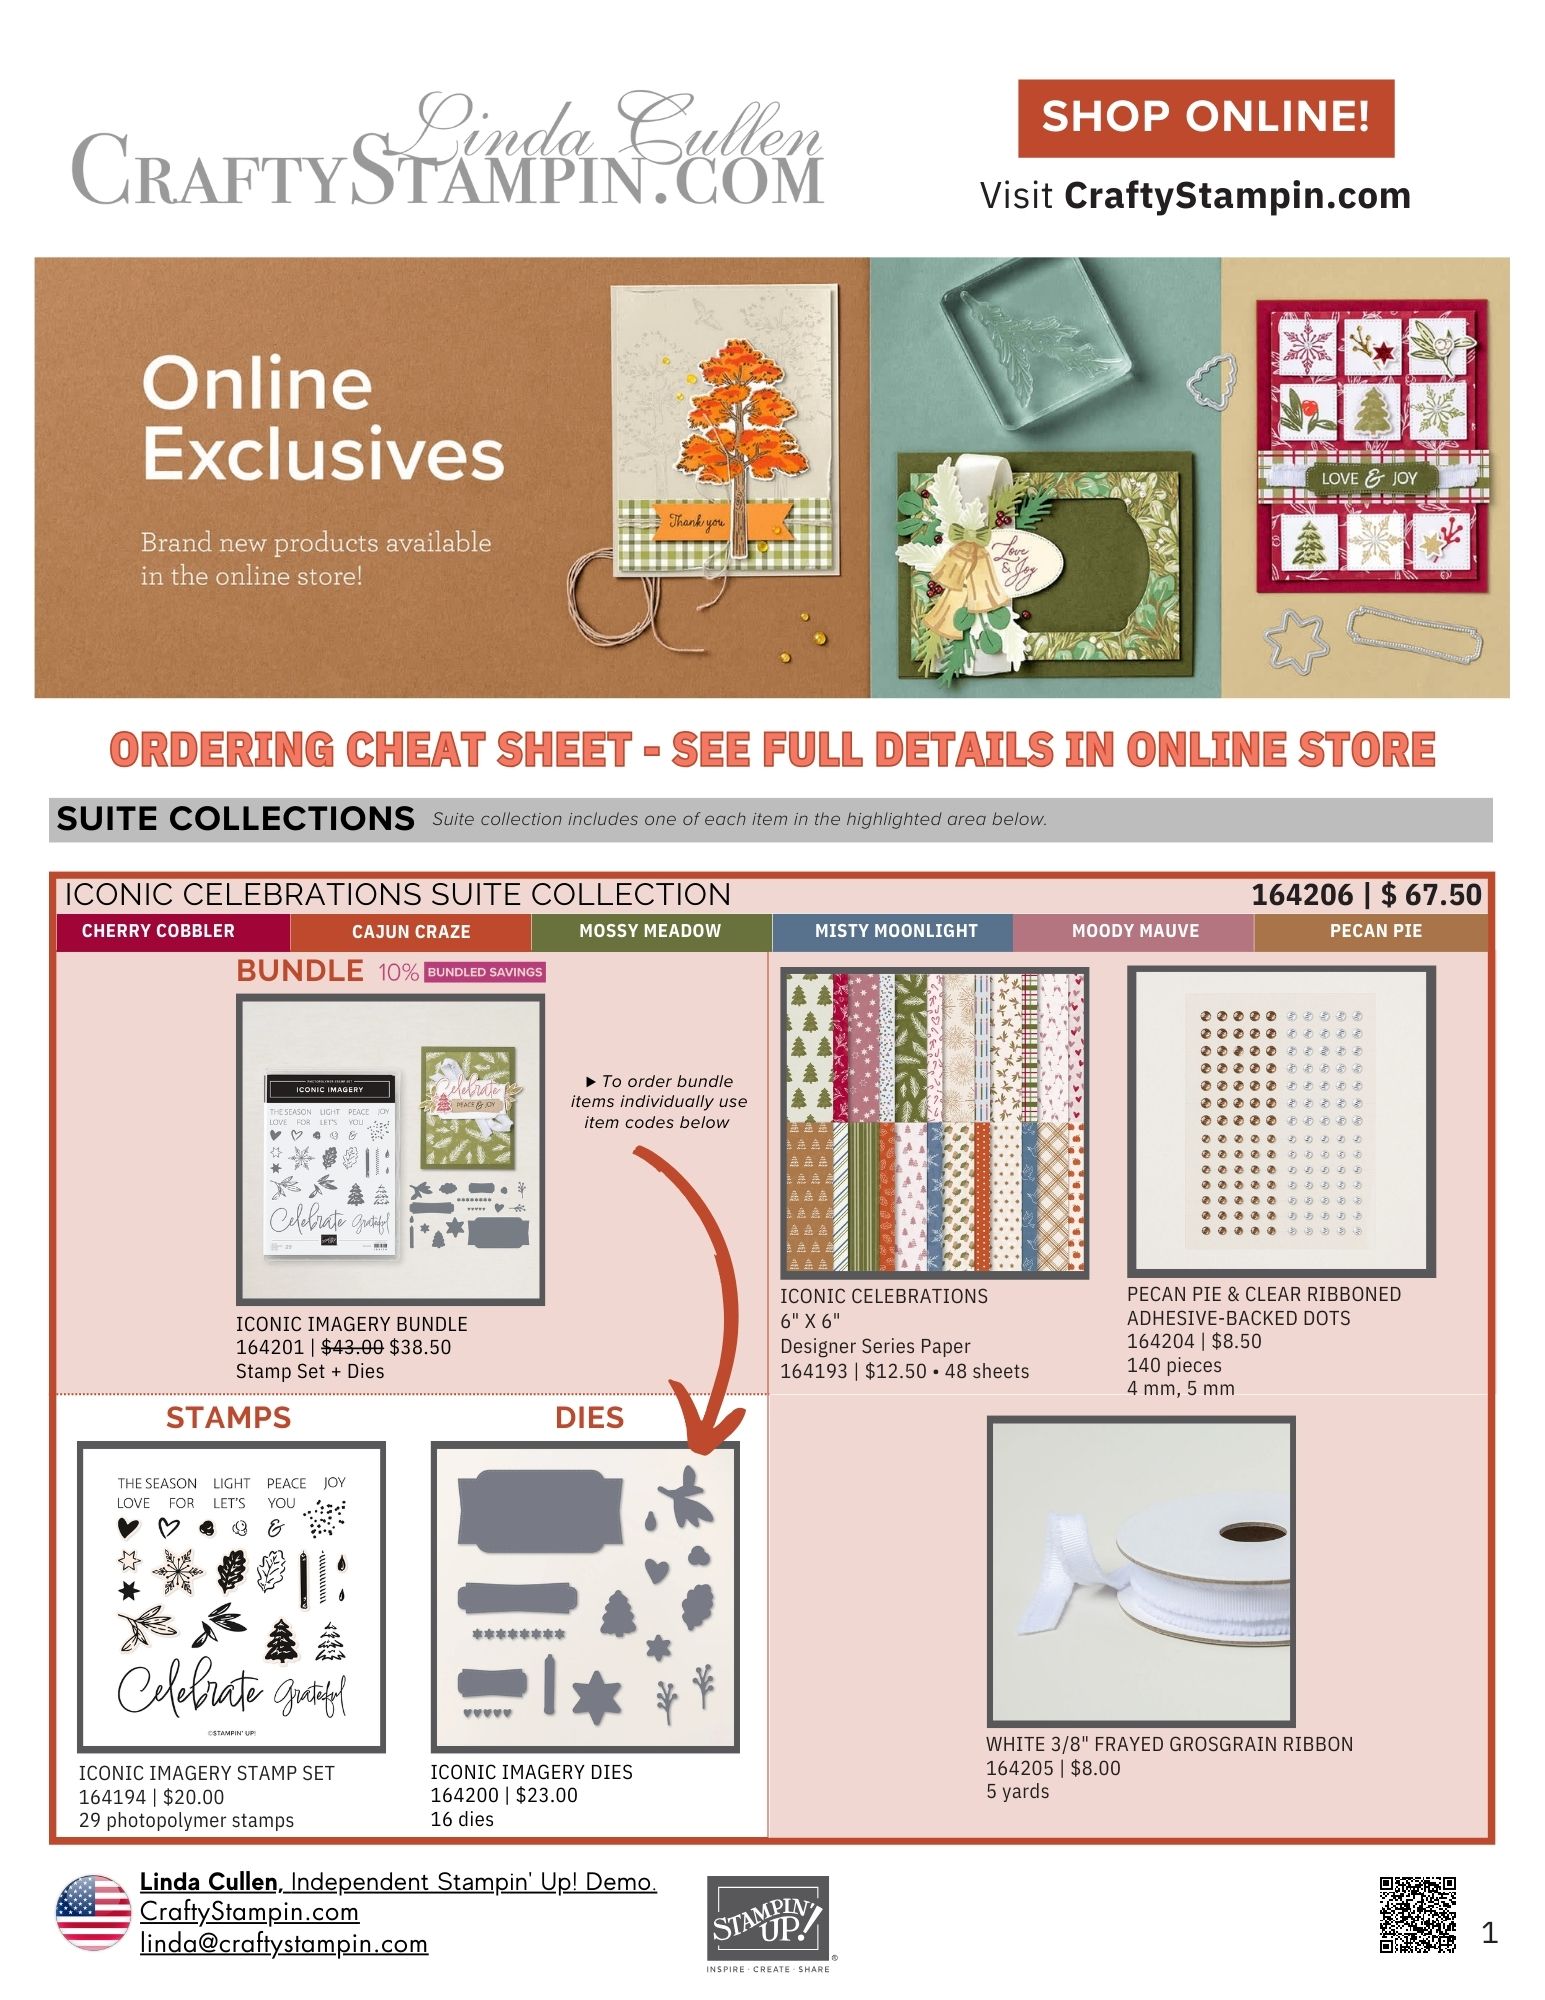 🚨NEW Online Exclusives!!! Pre-Order Haul / Unboxing Episode 171 | Join Stampin’ Up! | Frequently Asked Questions about becoming a Stampin’ Up! Demonstrator | Join the Craft Stampin’ Crew | Stampin Up Demonstrator Linda Cullen | Crafty Stampin’ | Purchase Stampin’ Up! Product | FAQ about Paper Pumpkin | FAQ about Kits Collection | Online Exclusive Products |